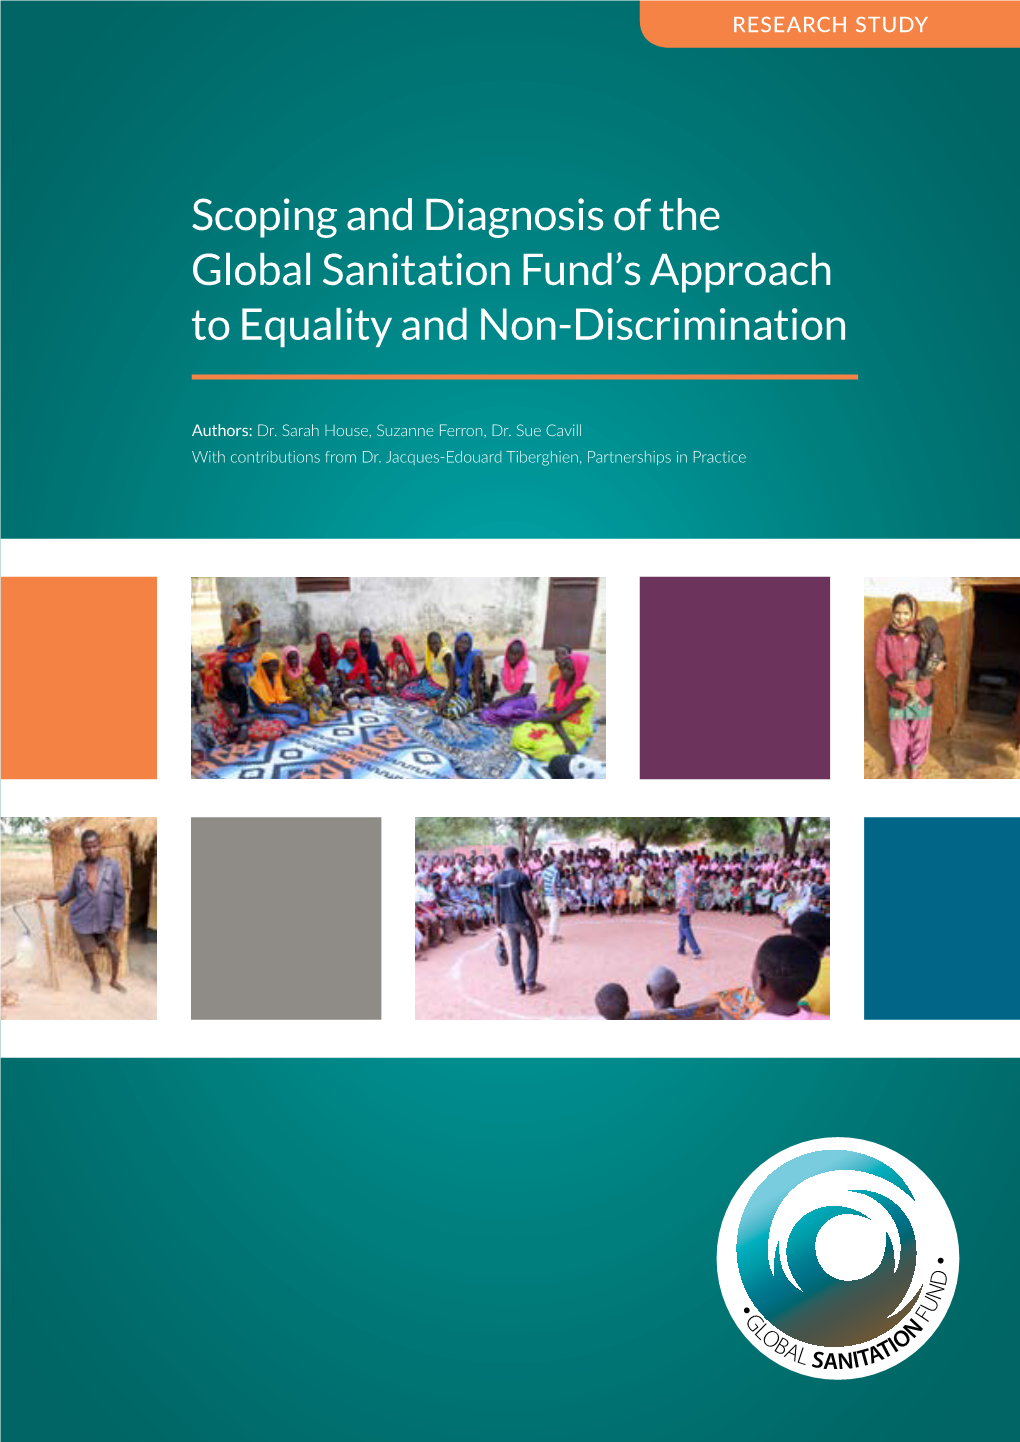 GSF), Which Since 2008 Has Committed Over $117 Million to Transform Lives in Developing Countries